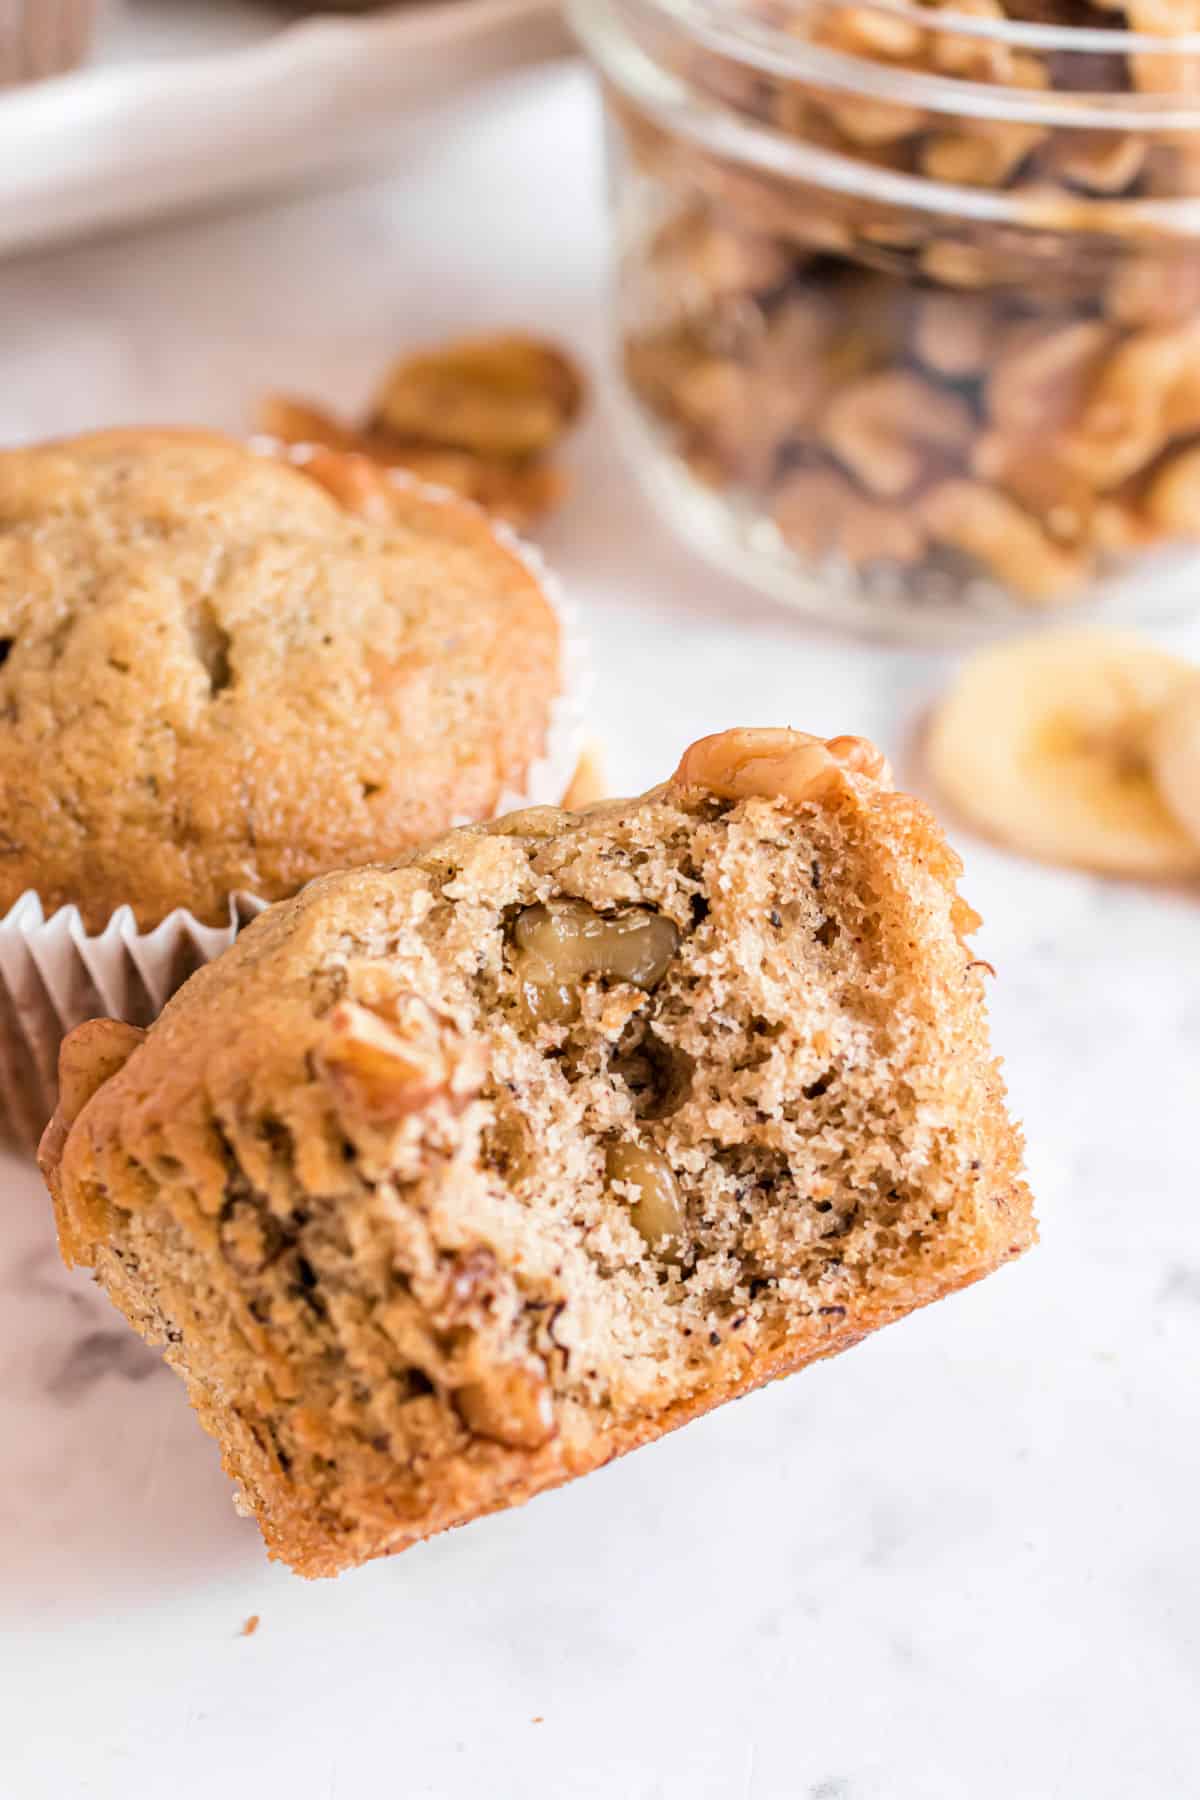 Banana nut muffins with a bite taken.